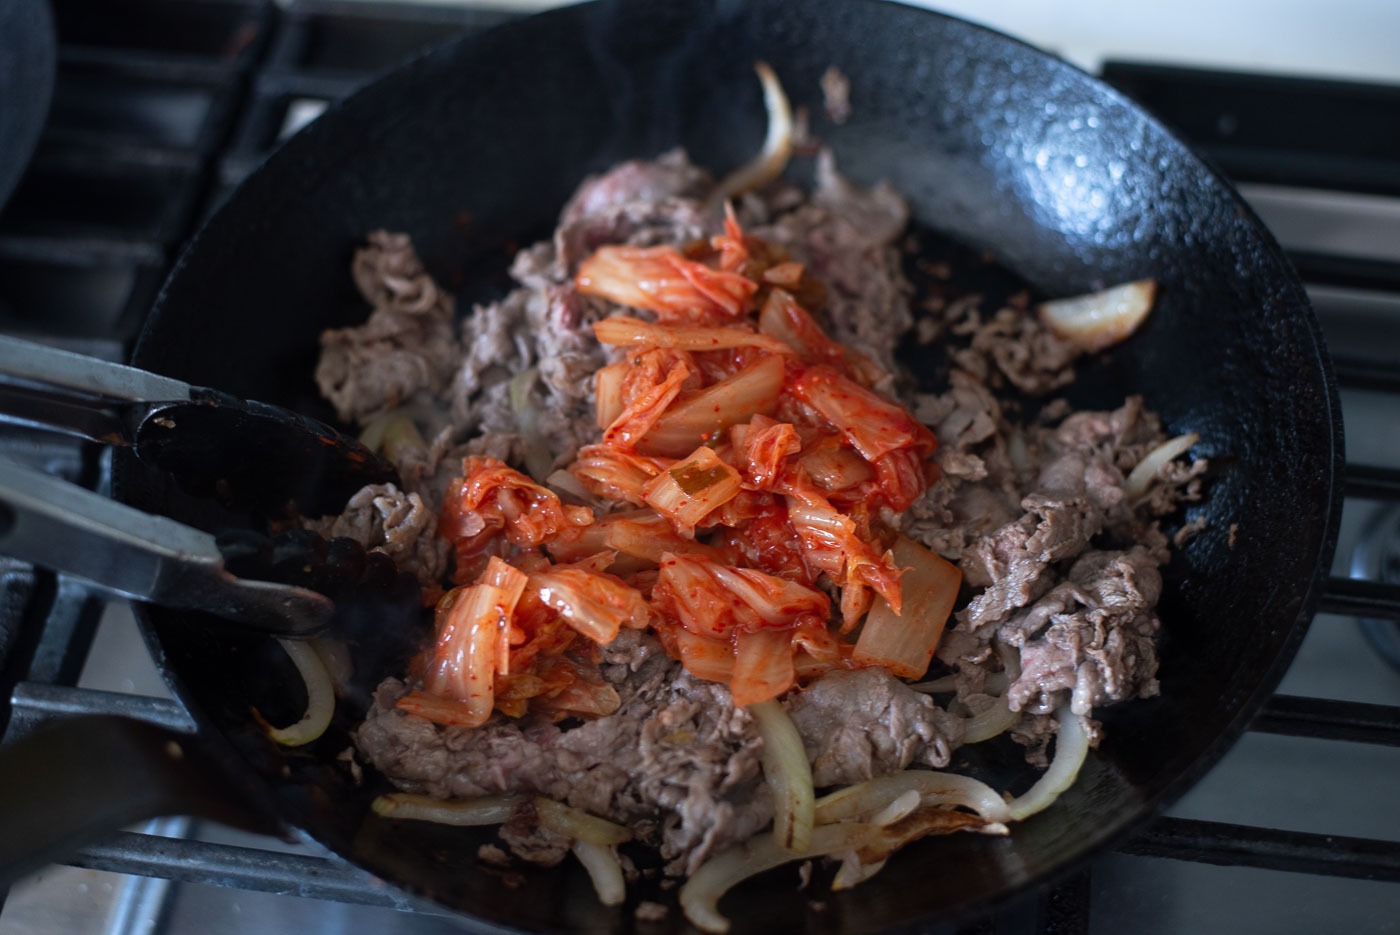 Kimchi slices are added to cooked beef and onion in a skillet for bulgogi cheesesteak.